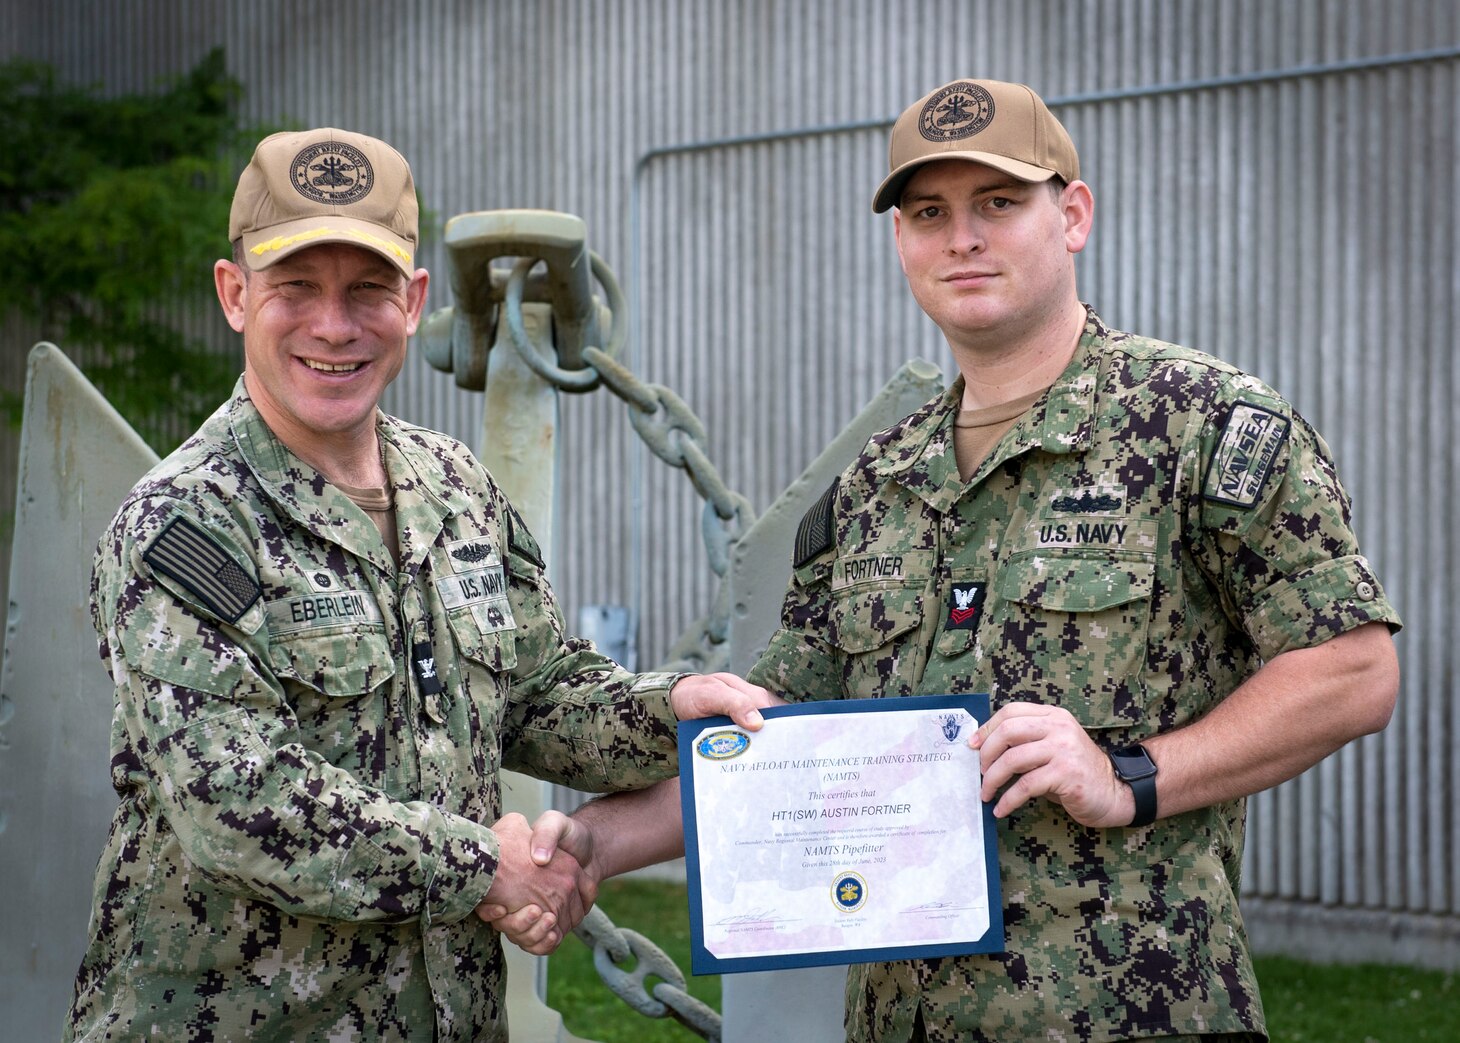 SILVERDALE, Wash. (Jun. 29, 2023) – U.S. Navy Capt. Michael D. Eberlein, left, commanding officer of Trident Refit Facility, Bangor (TRFB), presents a certificate to Hull Maintenance Technician 1st Class Austin Fortner. Fortner received recognition for completing his Navy Enlisted Classification (NEC) as a pipefitter under the Navy Afloat Maintenance Training Strategy (NAMTS) at TRFB. Fortner, currently attached to Naval Reserve Center-Houston, was mobilized under Surgemain from August 2020 to September 2021 where he enrolled under the NAMTS program to earn his pipefitter qualification. TRFB supports the nation’s strategic deterrence mission by repairing, incrementally overhauling, and modernizing Pacific Fleet strategic ballistic missile submarines during refits. (U.S. Navy photo by Mass Communication Specialist 2nd Class Sarah Christoph)